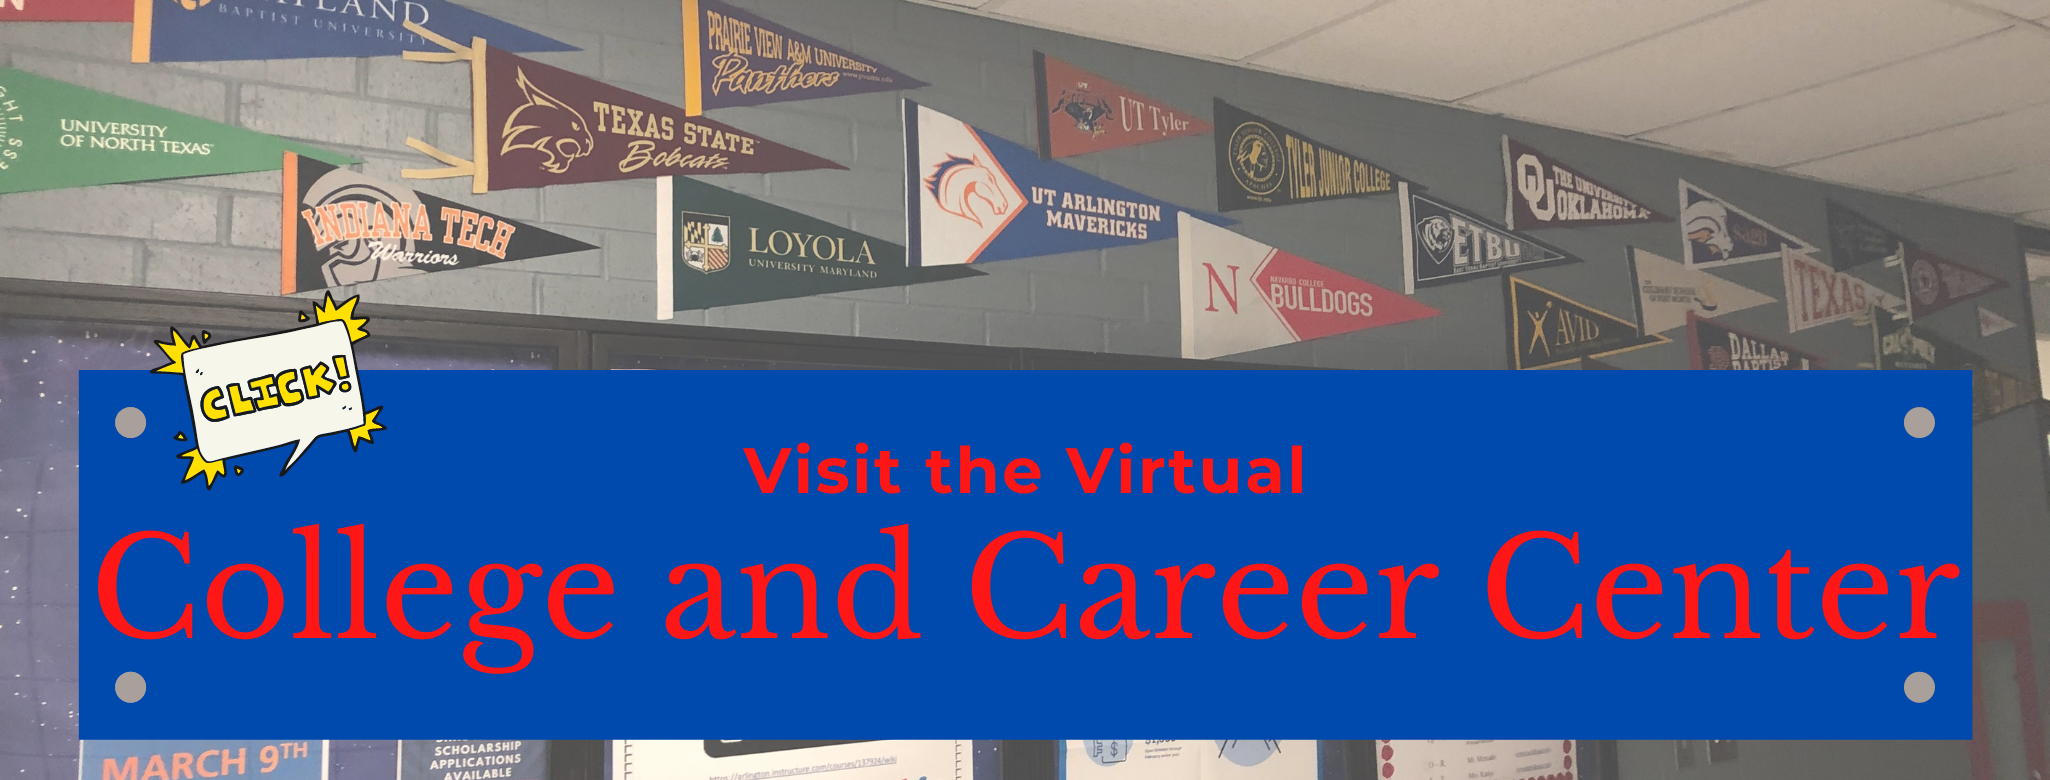 Virtual College and Career Center.png